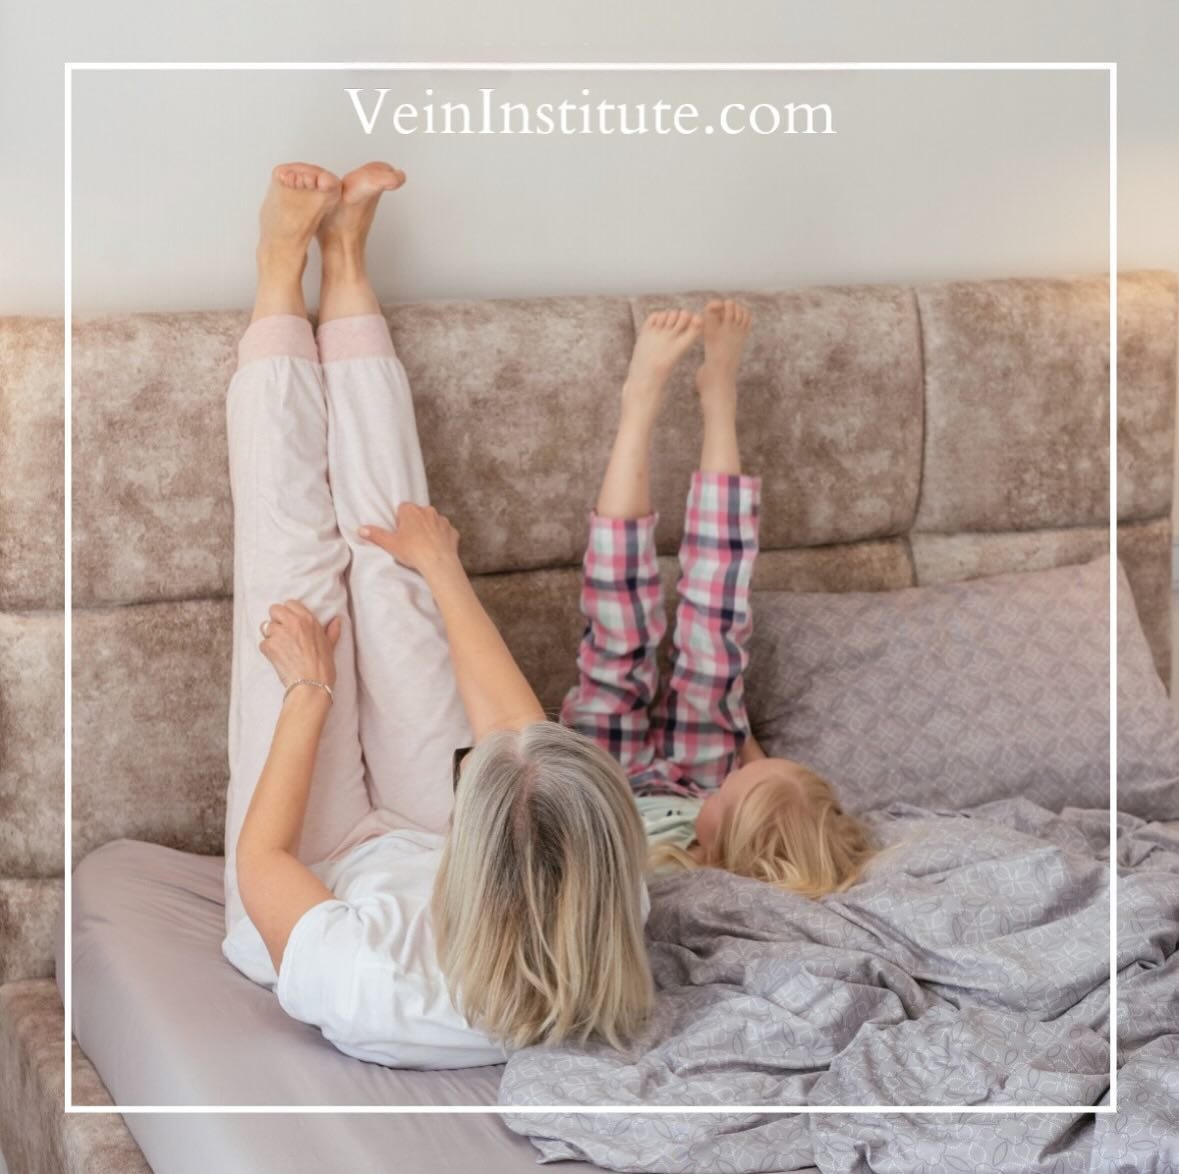 Feeling the pressure? 🦵
Elevate those legs! Propping your feet above heart level or doing the legs-up-the-wall pose helps reduce the gravitational pull on your veins, promoting better circulation.

➡️ Request an appointment by calling the office 203